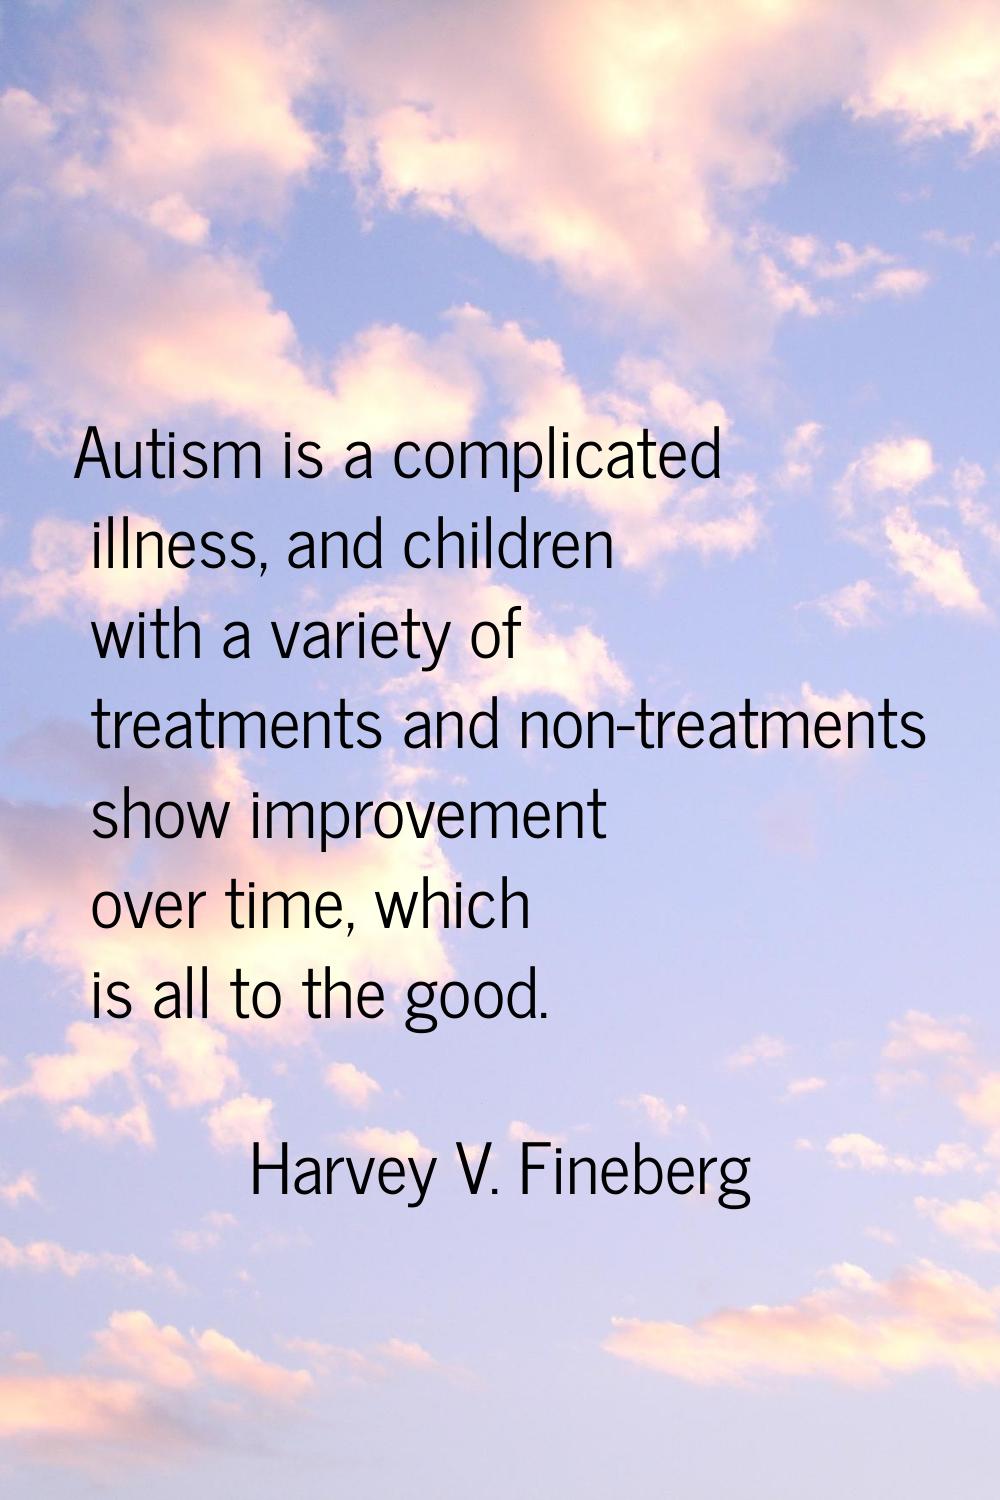 Autism is a complicated illness, and children with a variety of treatments and non-treatments show 